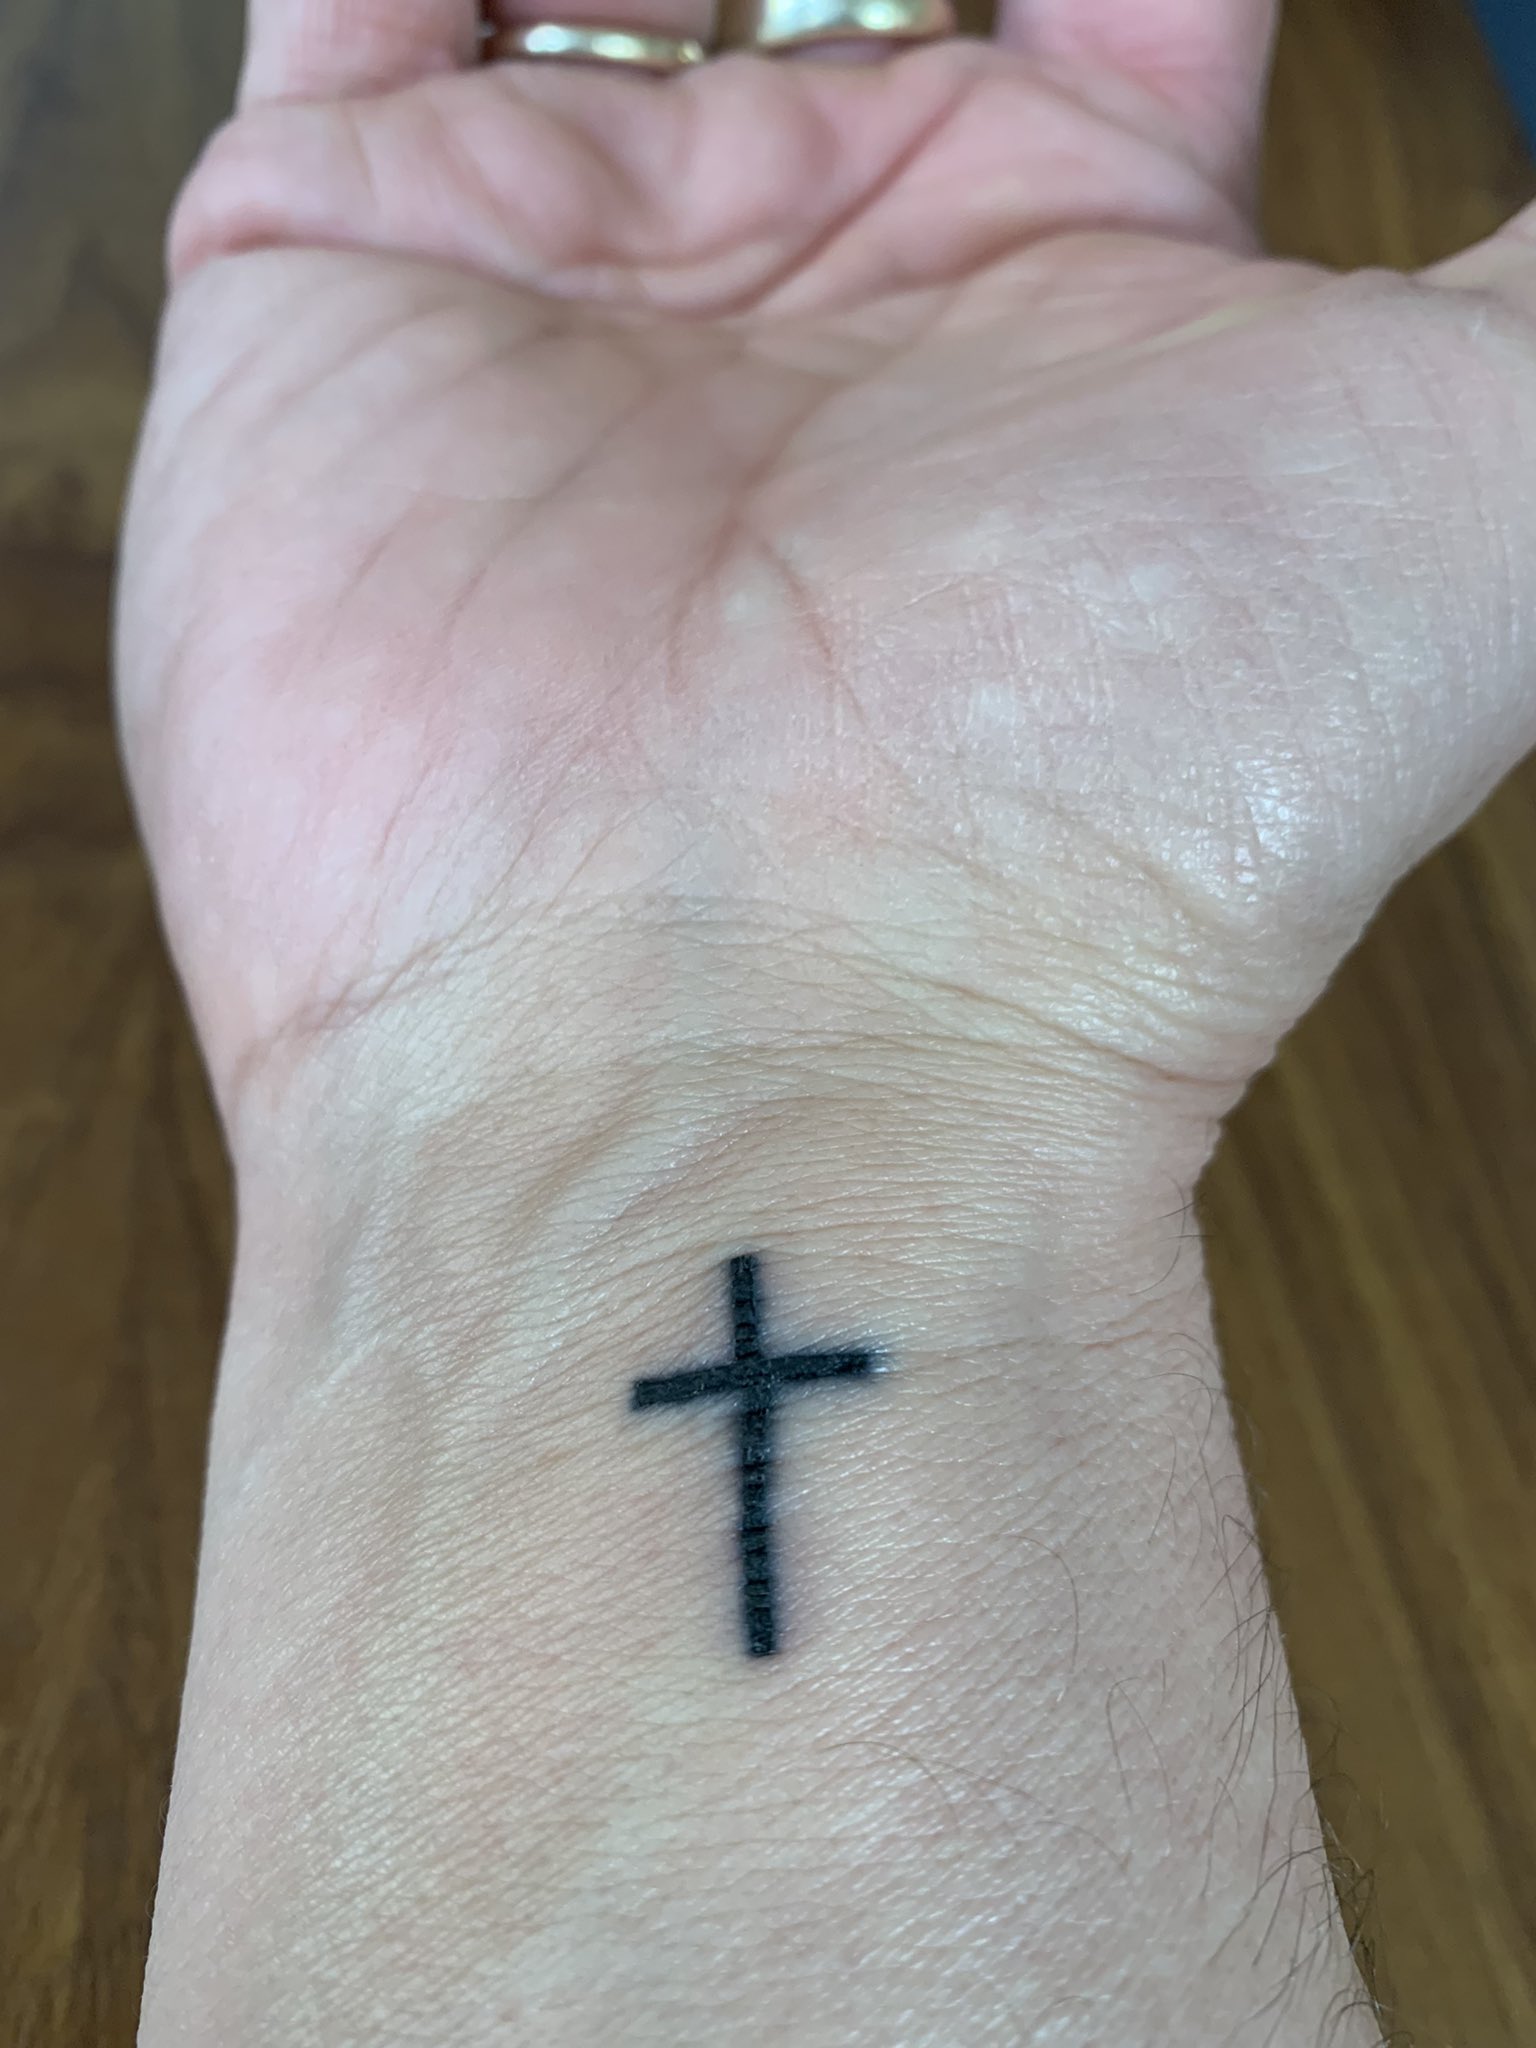 100 Amazing Cross Tattoos To Inspire You  The Trend Scout